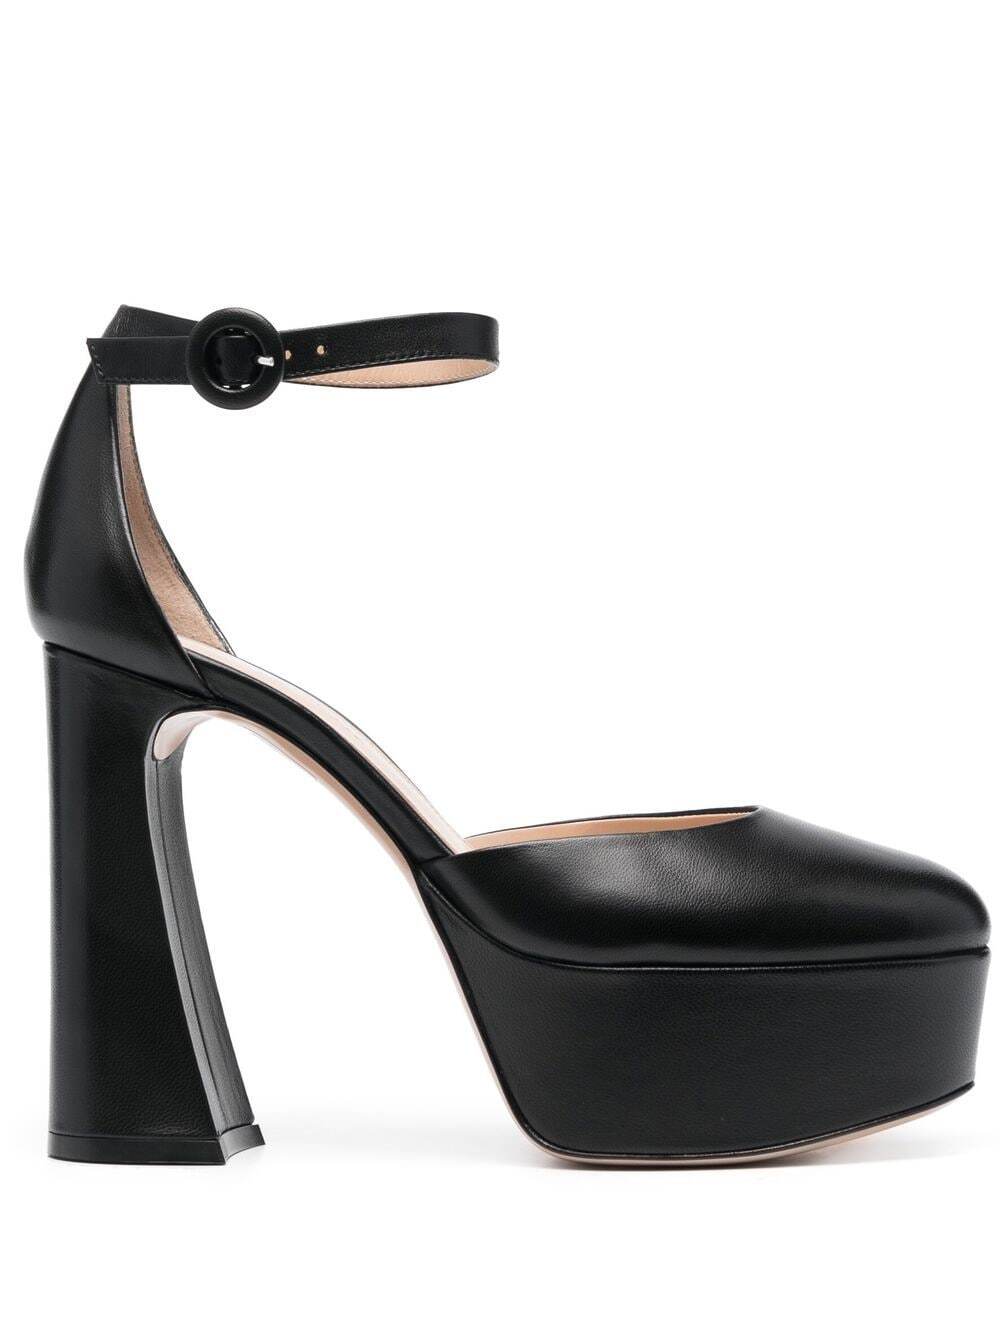 Holly D'Orsay 120mm Pumps